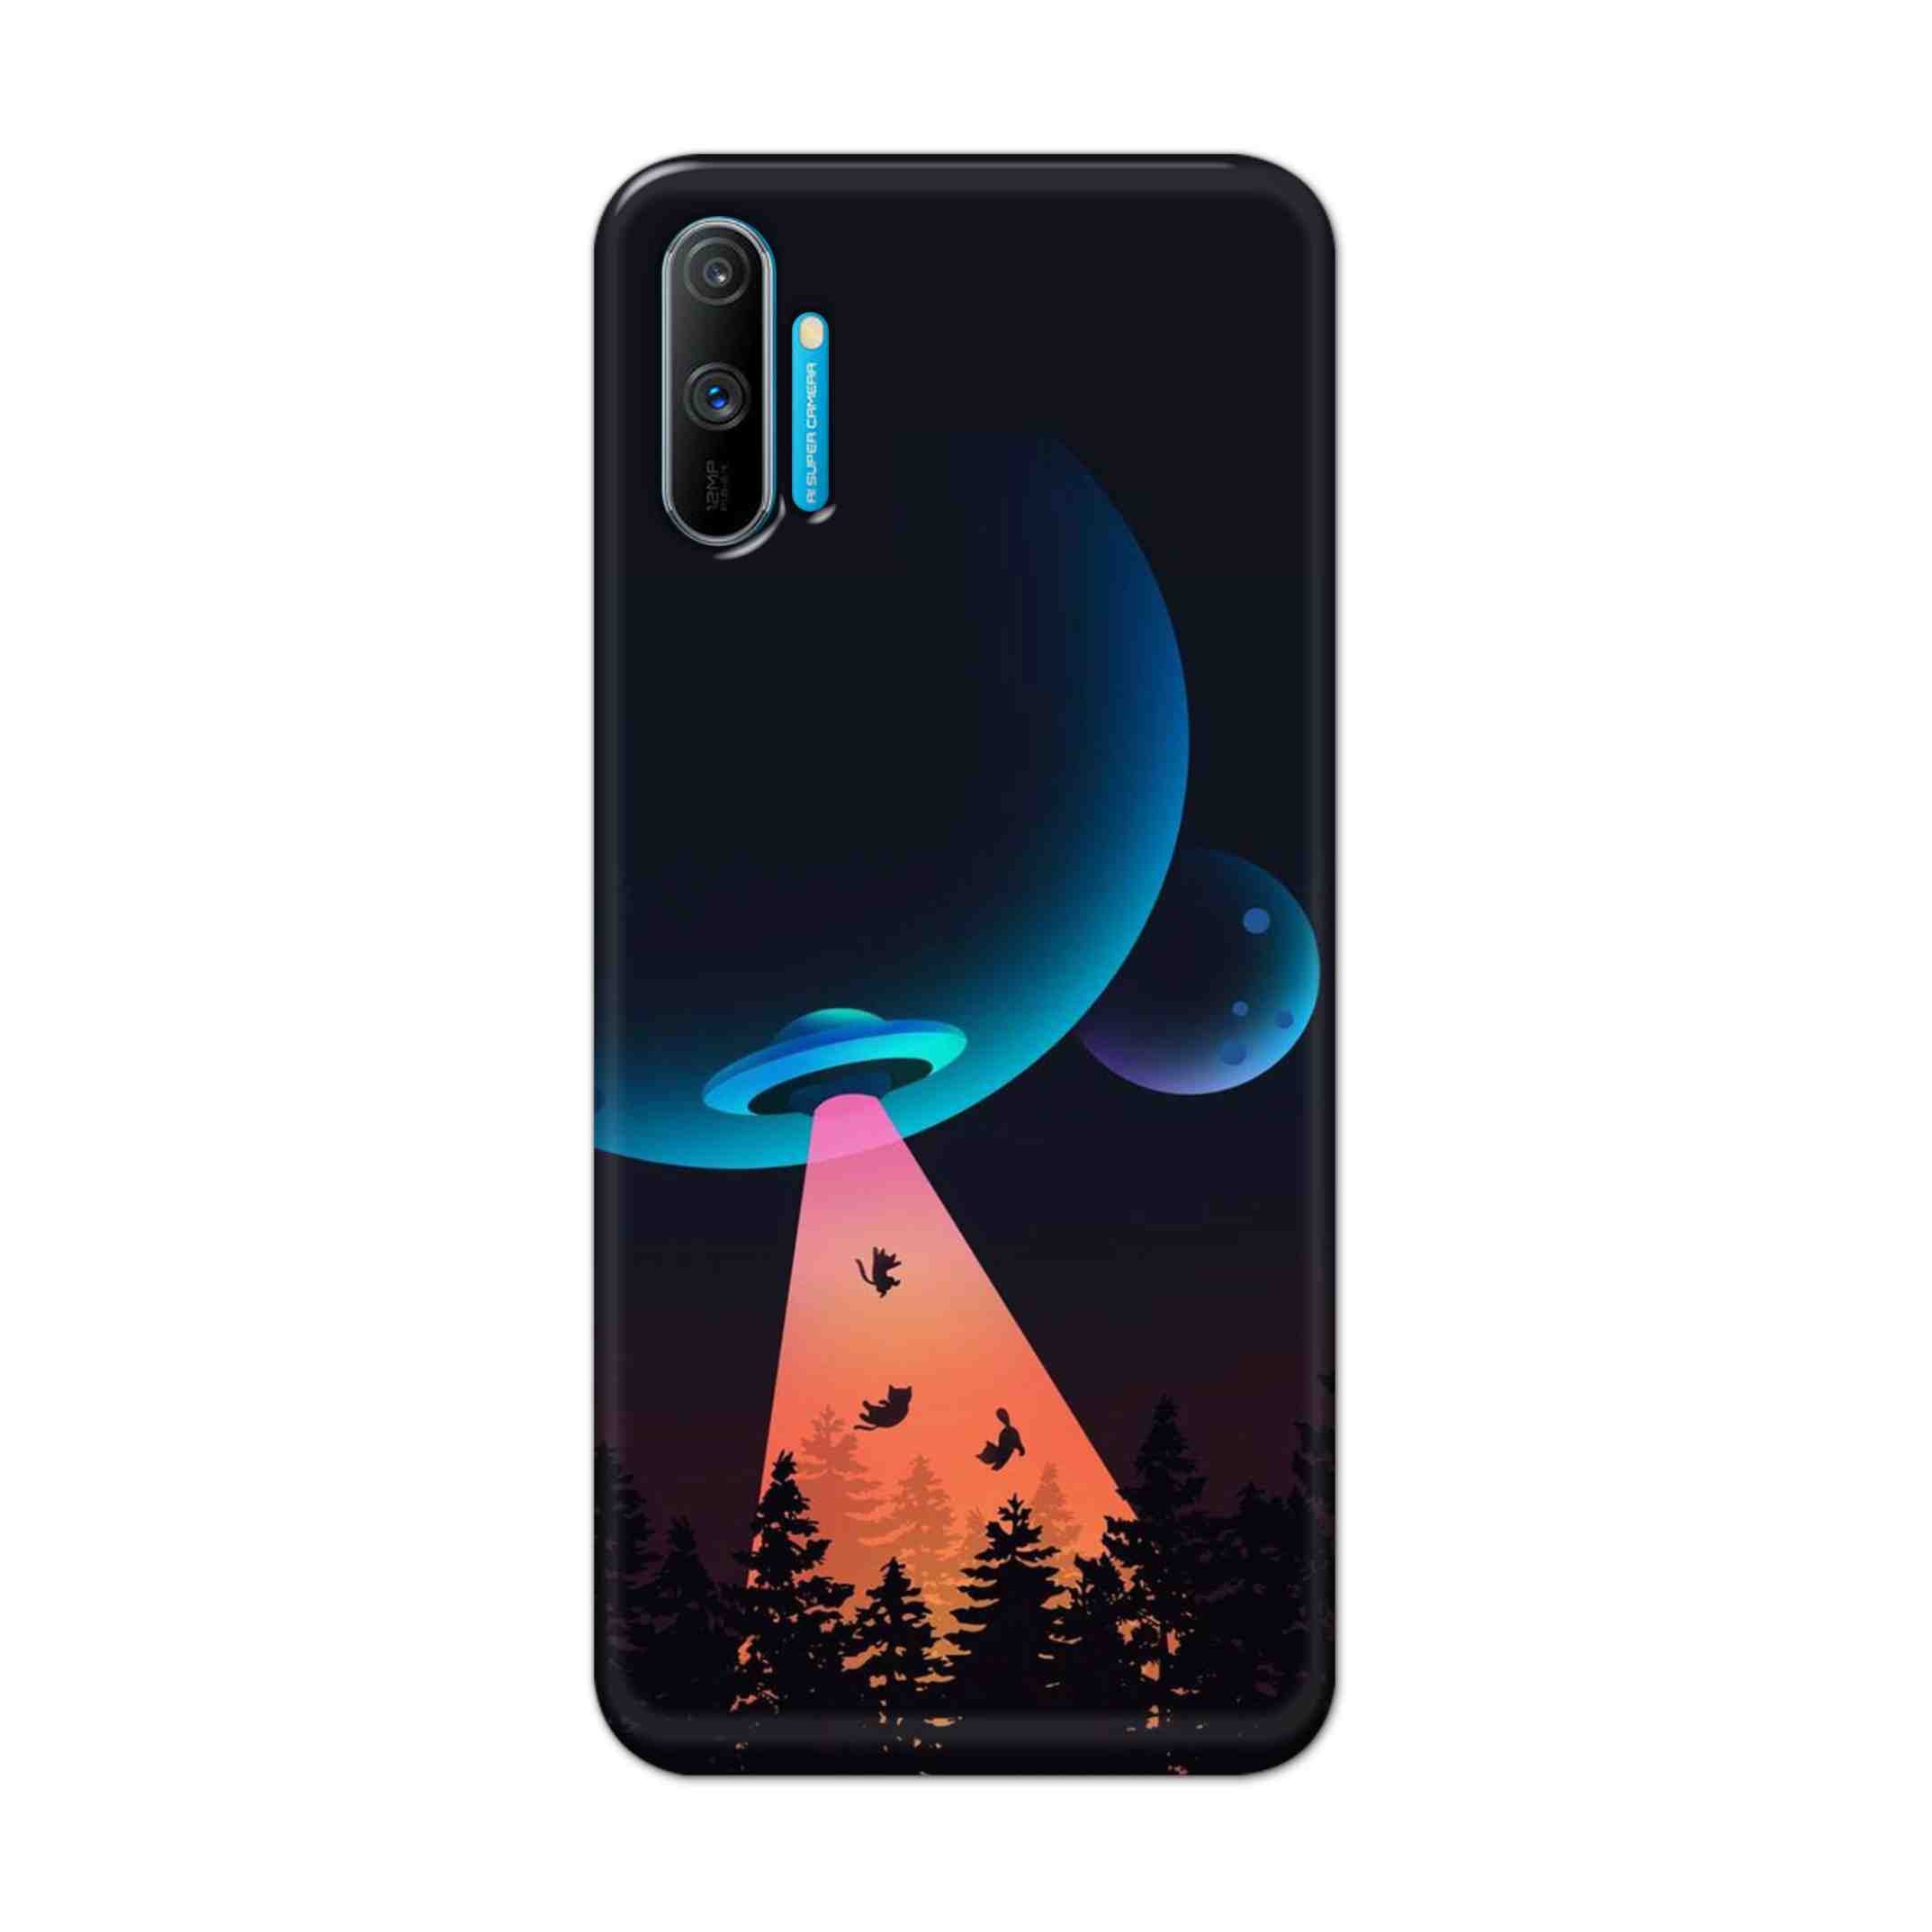 Buy Spaceship Hard Back Mobile Phone Case Cover For Realme C3 Online